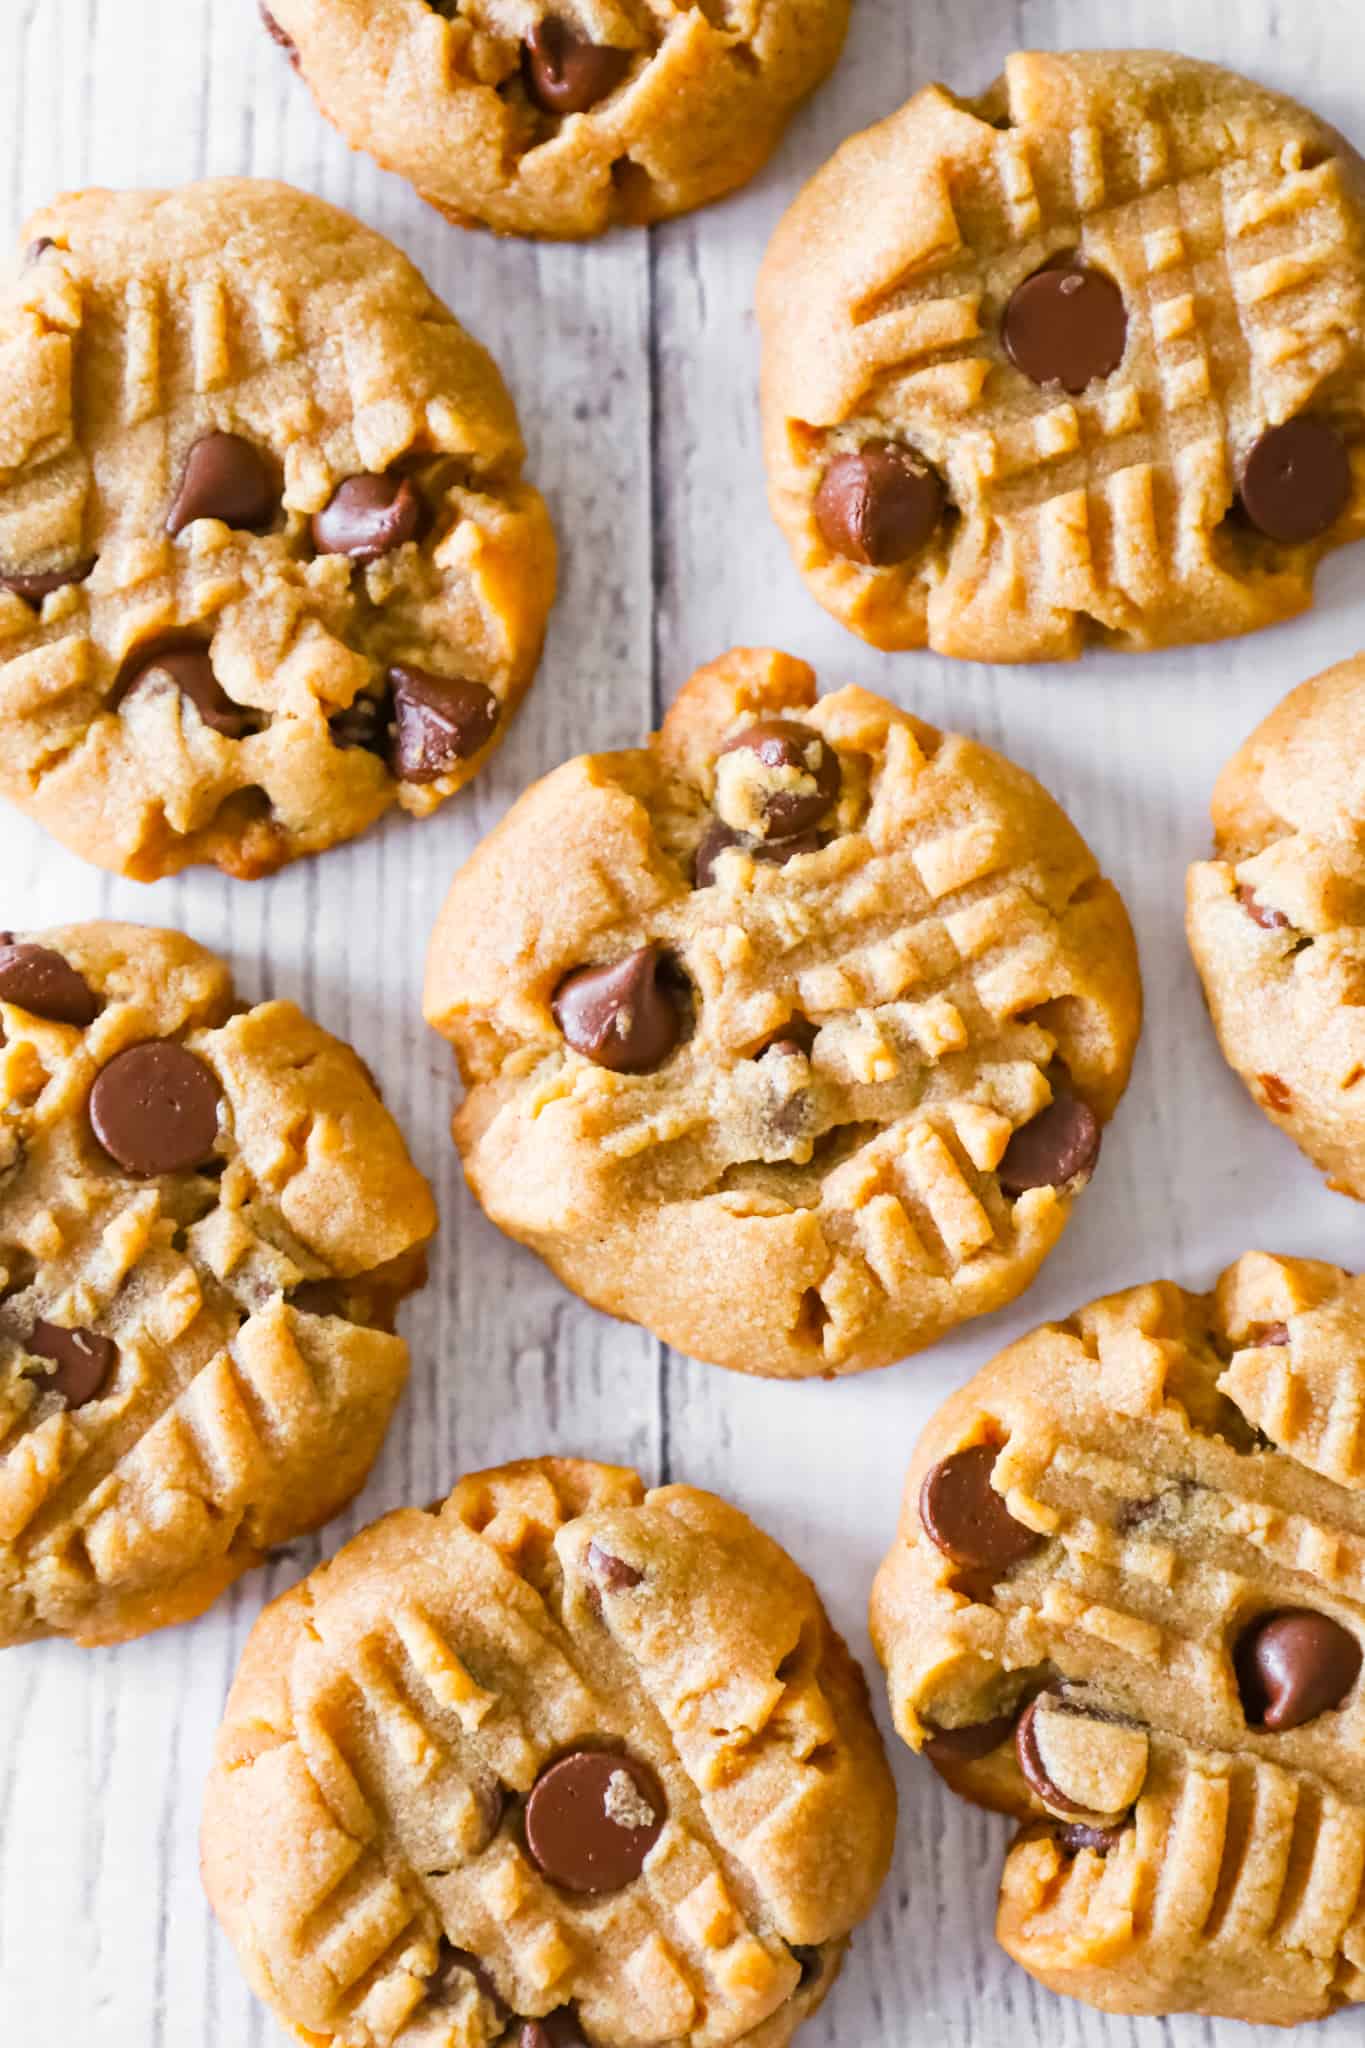 Peanut Butter Chocolate Chip Cookies are simple and delicious peanut butter cookies loaded with semi sweet chocolate chips.